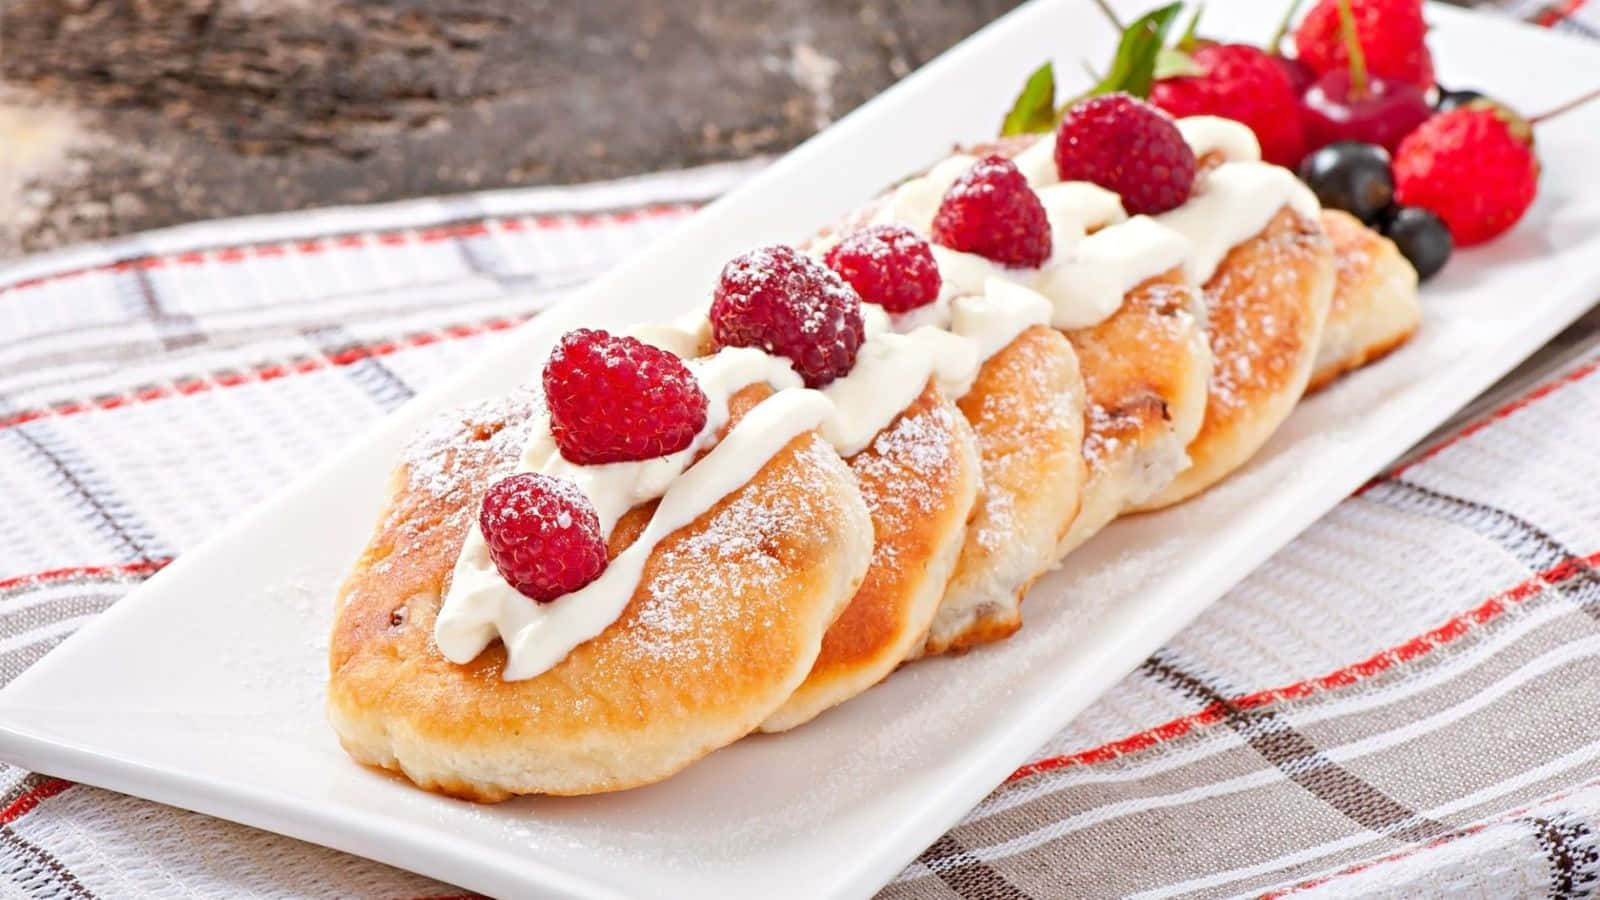 A Plate Of Pastries With Berries And Cream